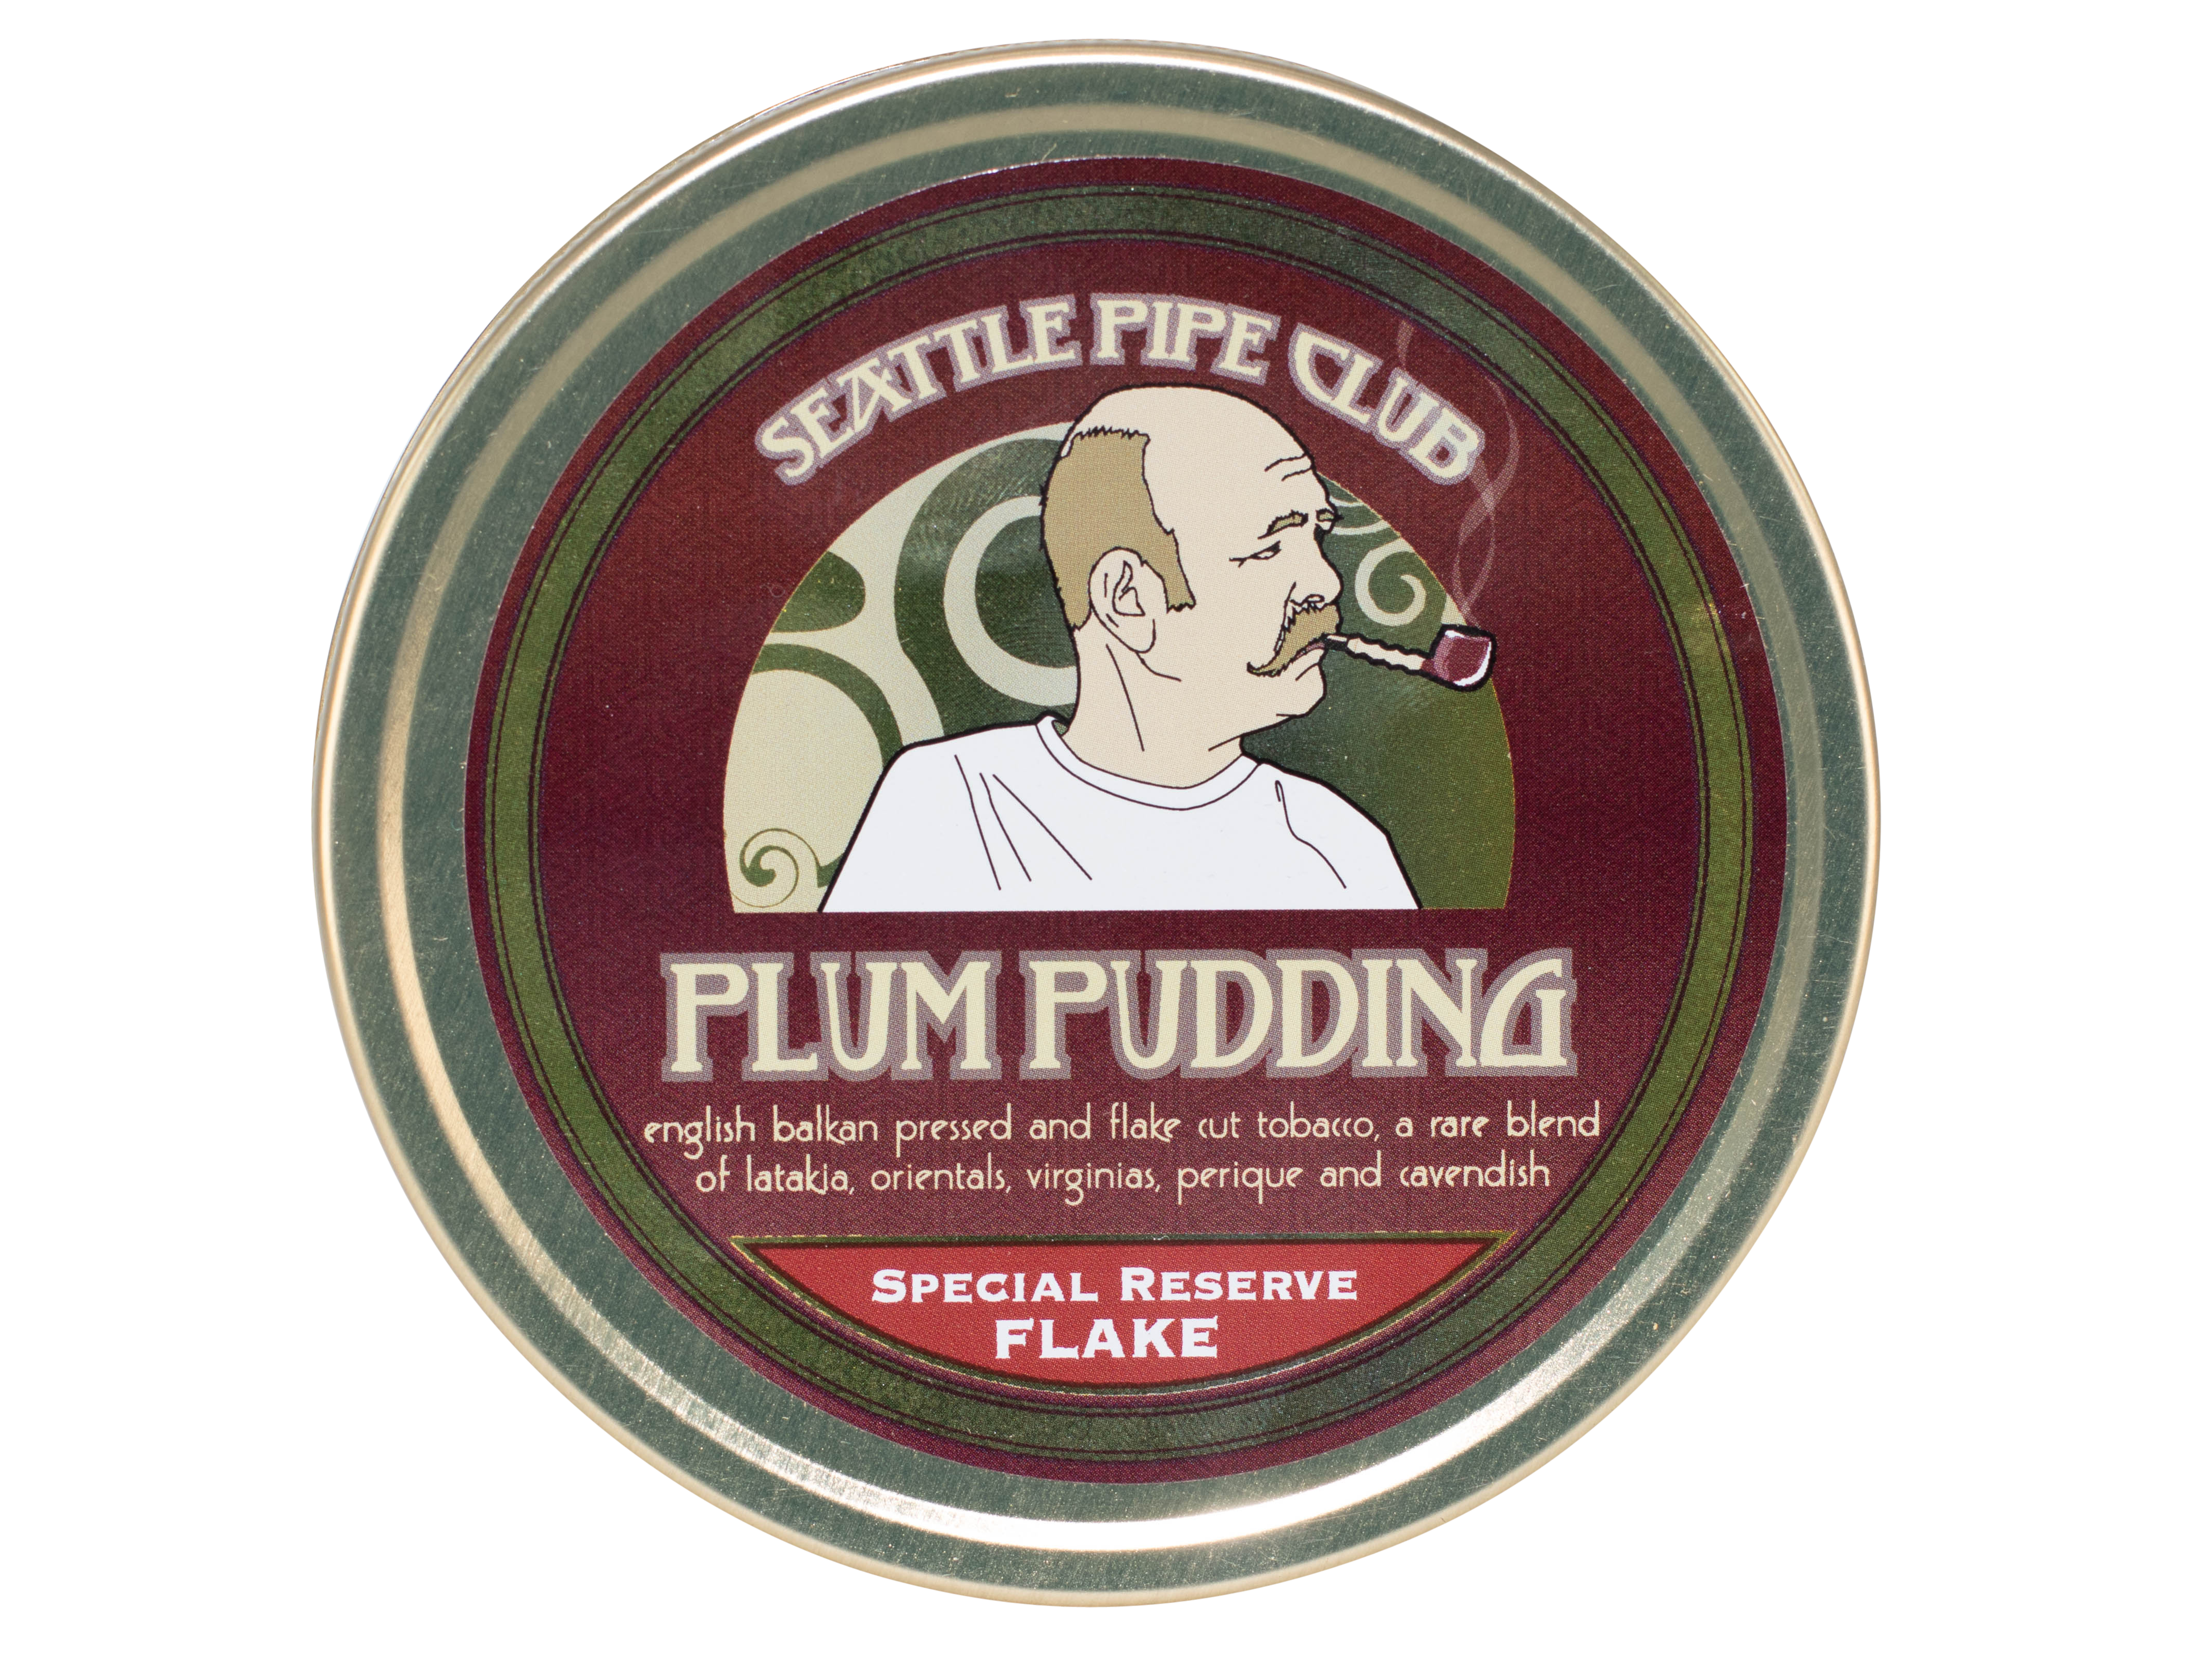 Seattle Pipe Club - Plum Pudding Special Reserve Flake